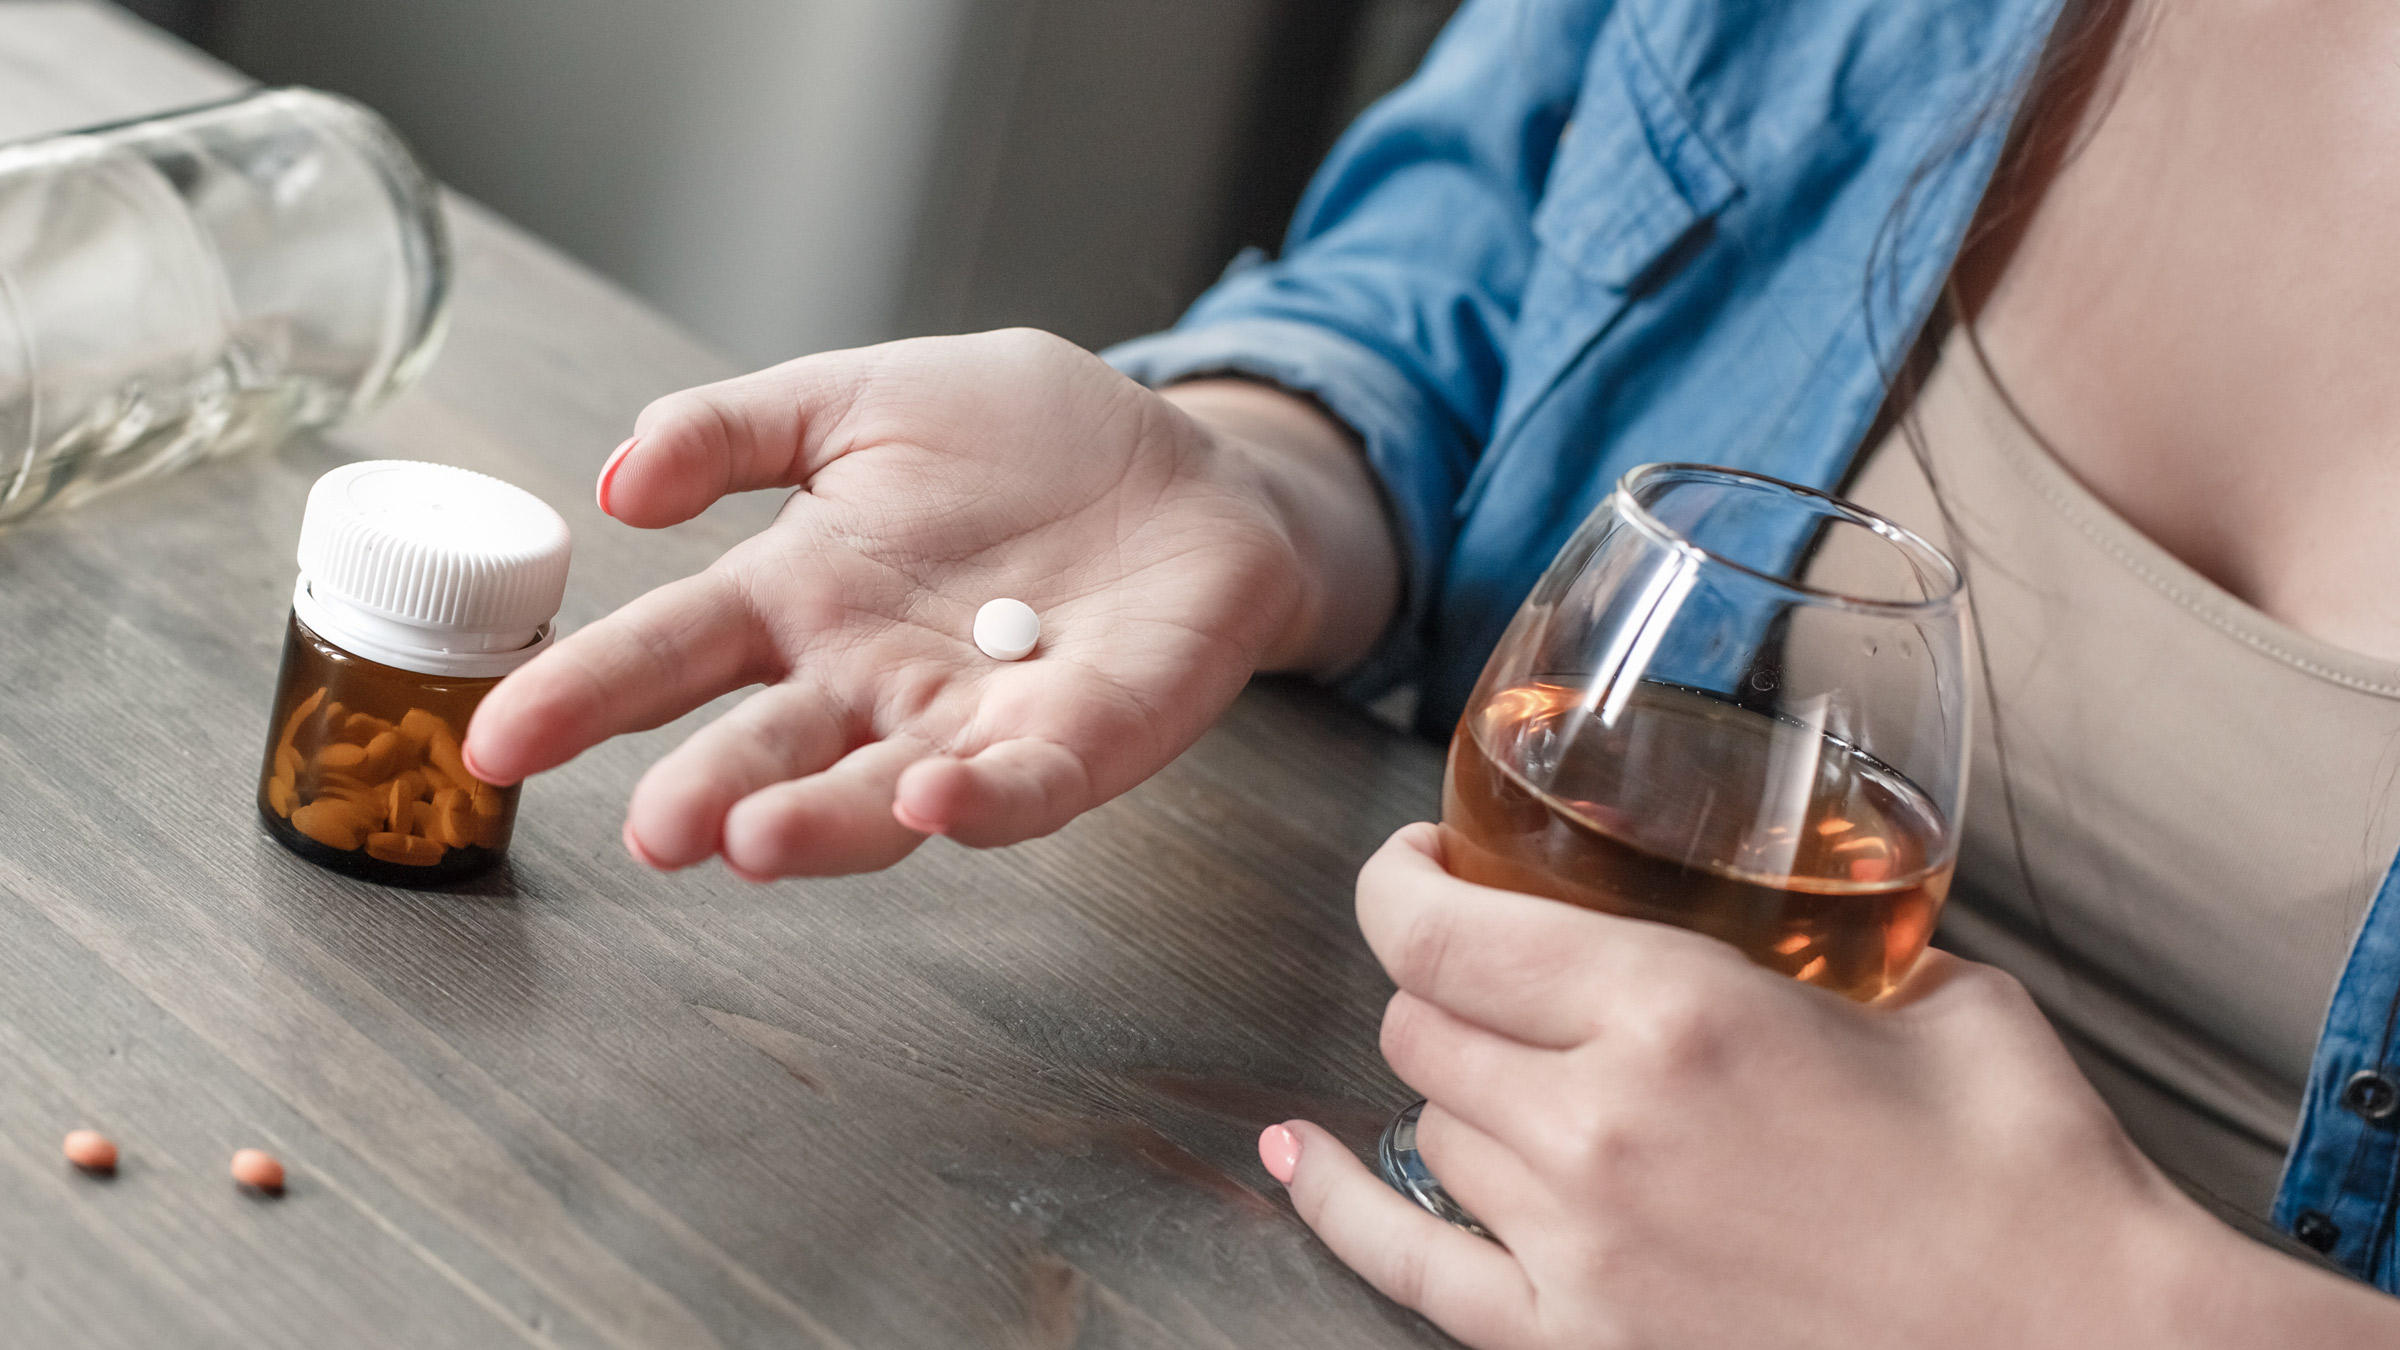 Can You Drink Alcohol After Taking Abortion Pill?